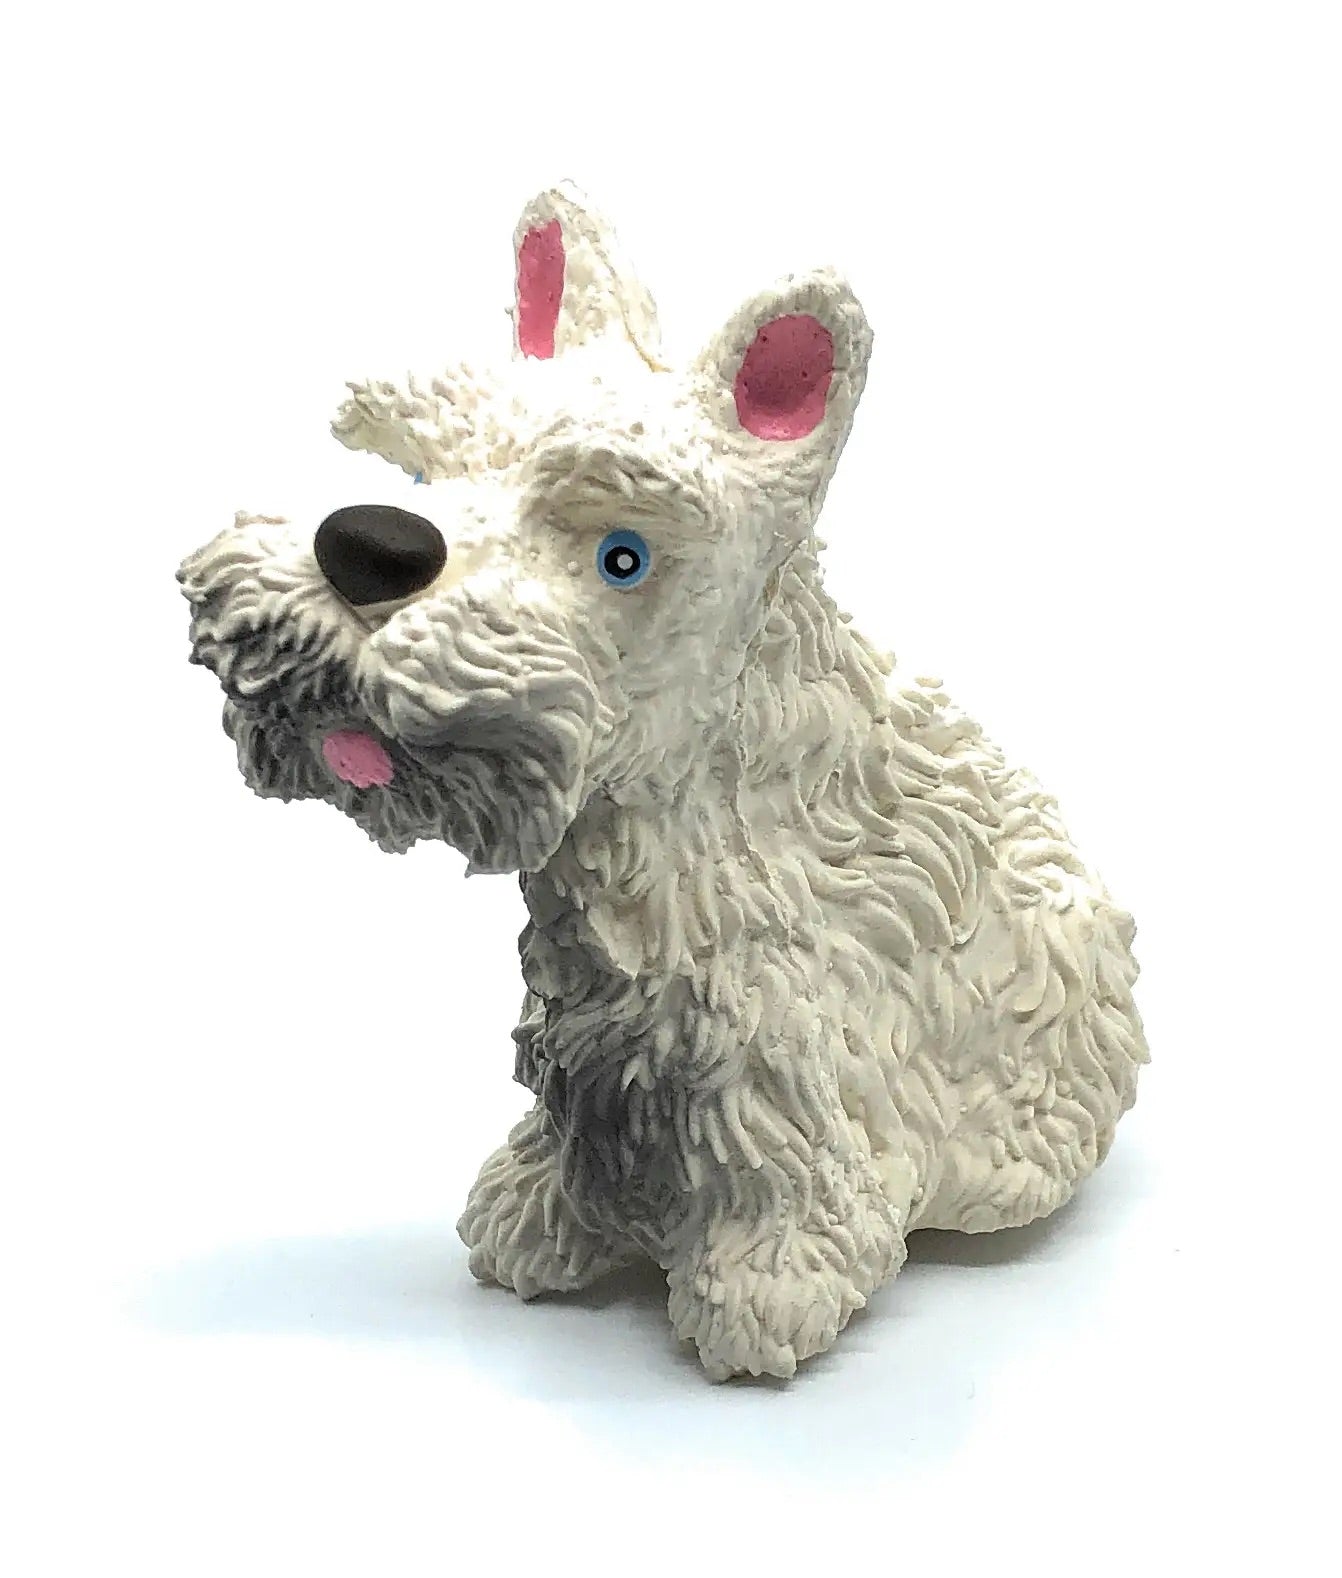 Lanco-Toys - Westie Squeaky Dog Toy - 100% Pure Natural Rubber